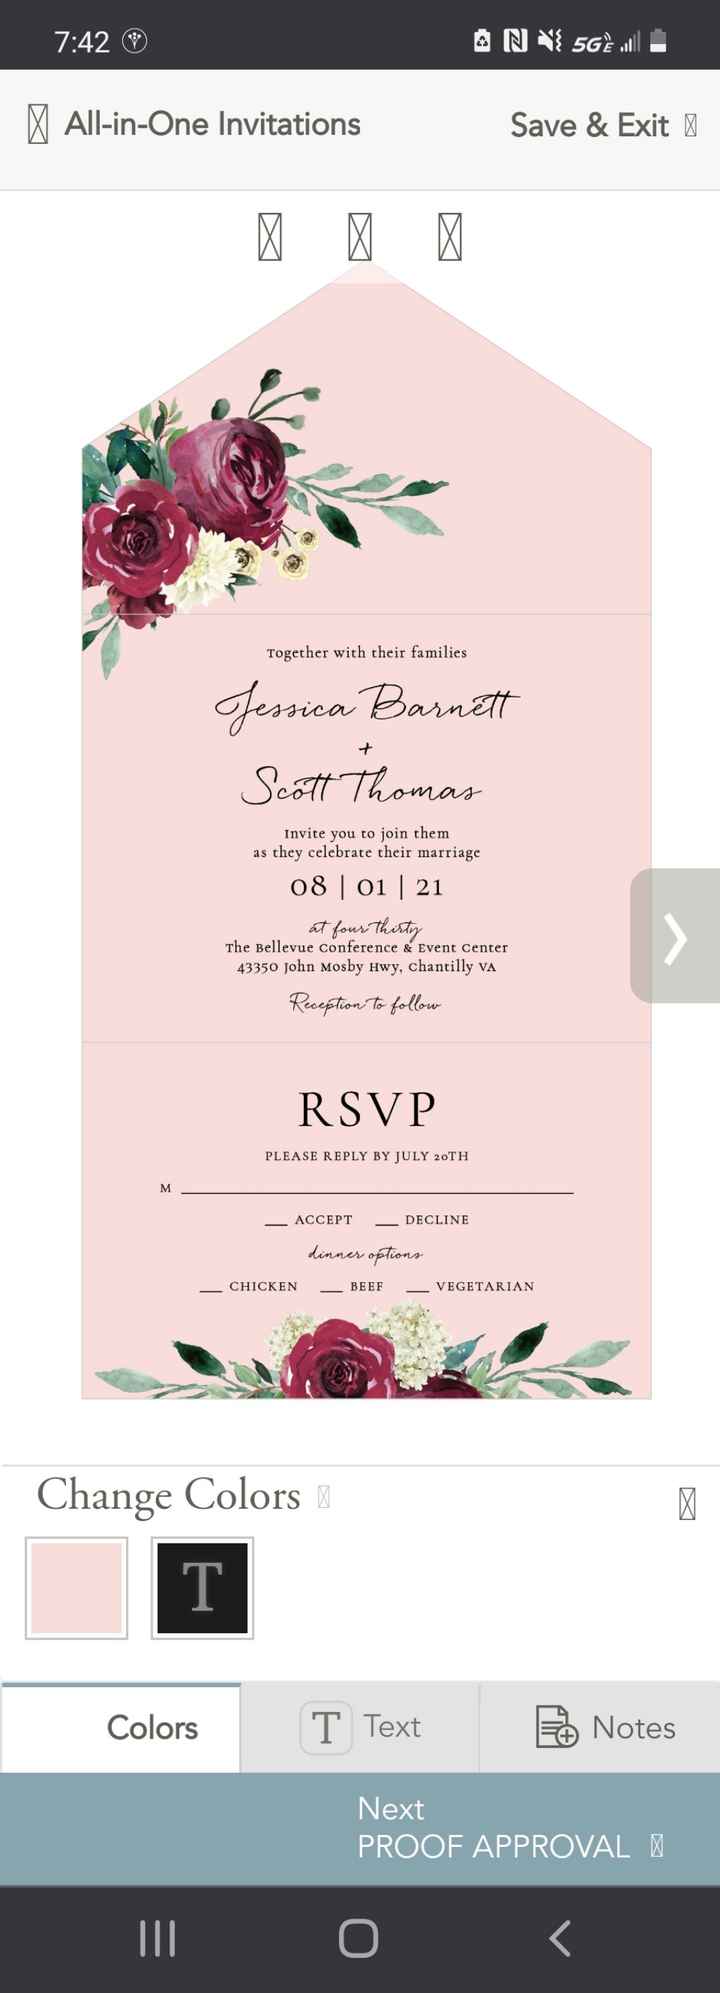 Wedding invitations looking for inspiration - 1